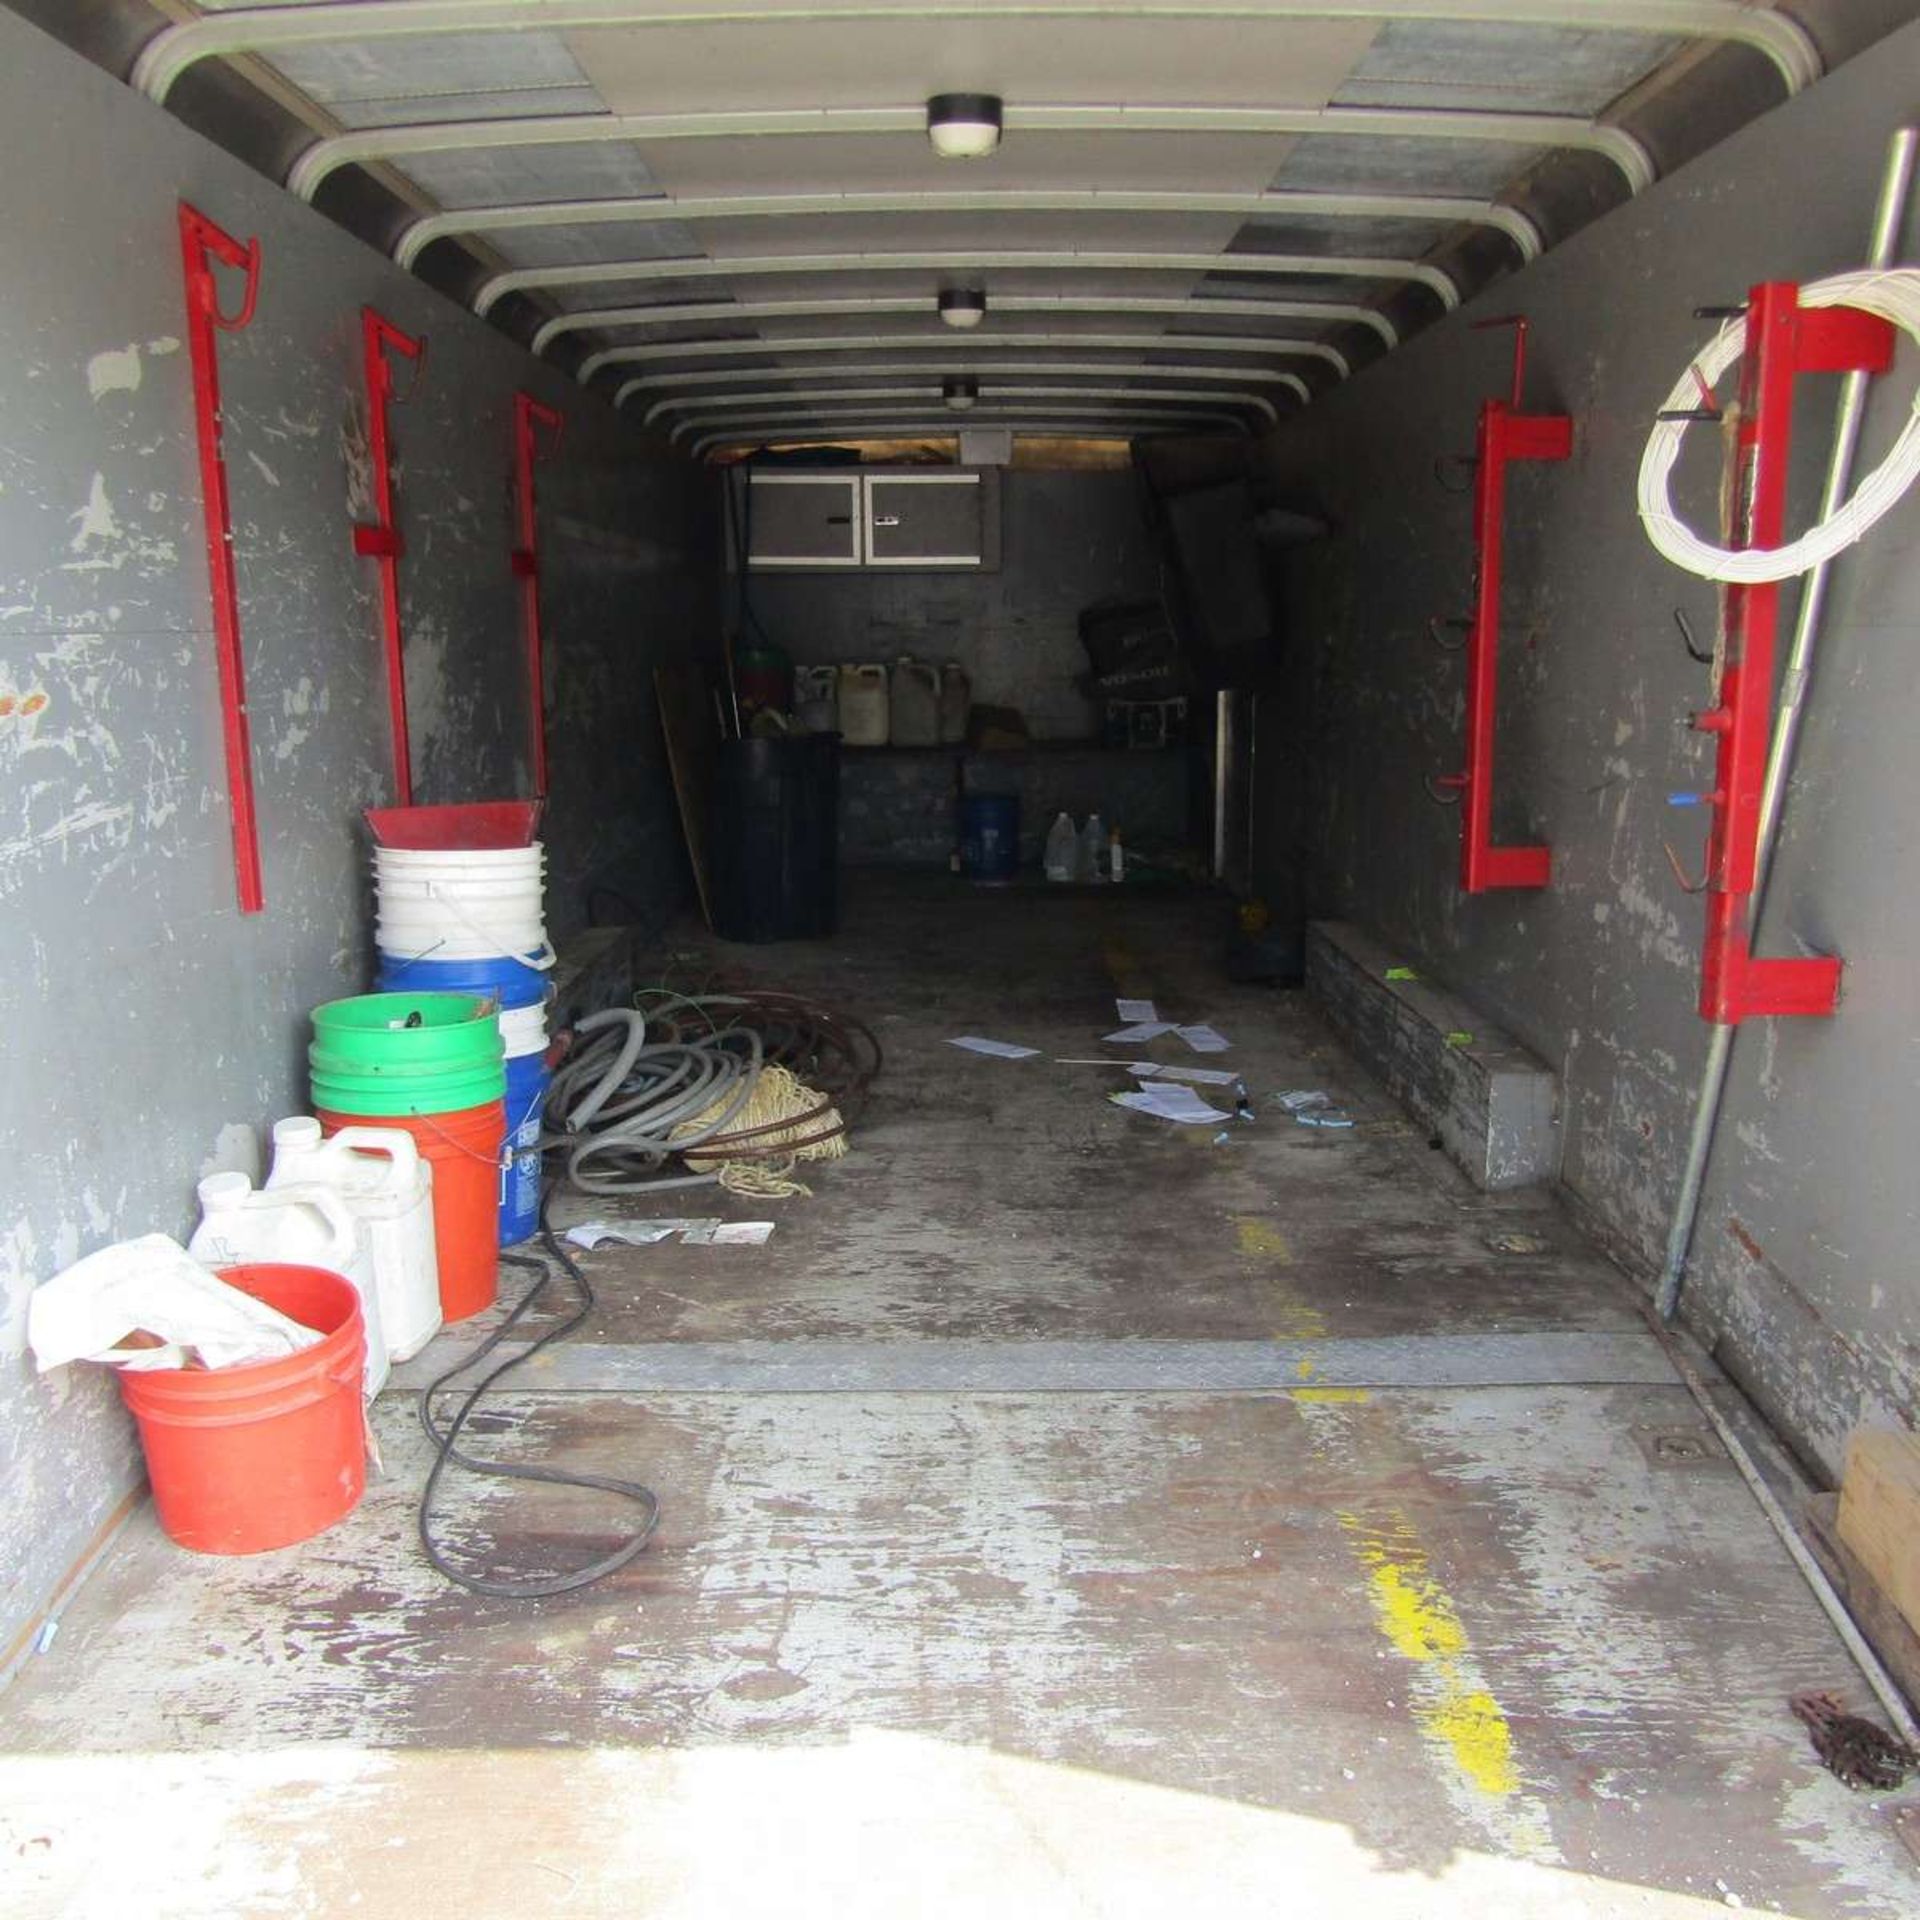 Wells Cargo AW2425 24' Enclosed Trailer - Image 4 of 4